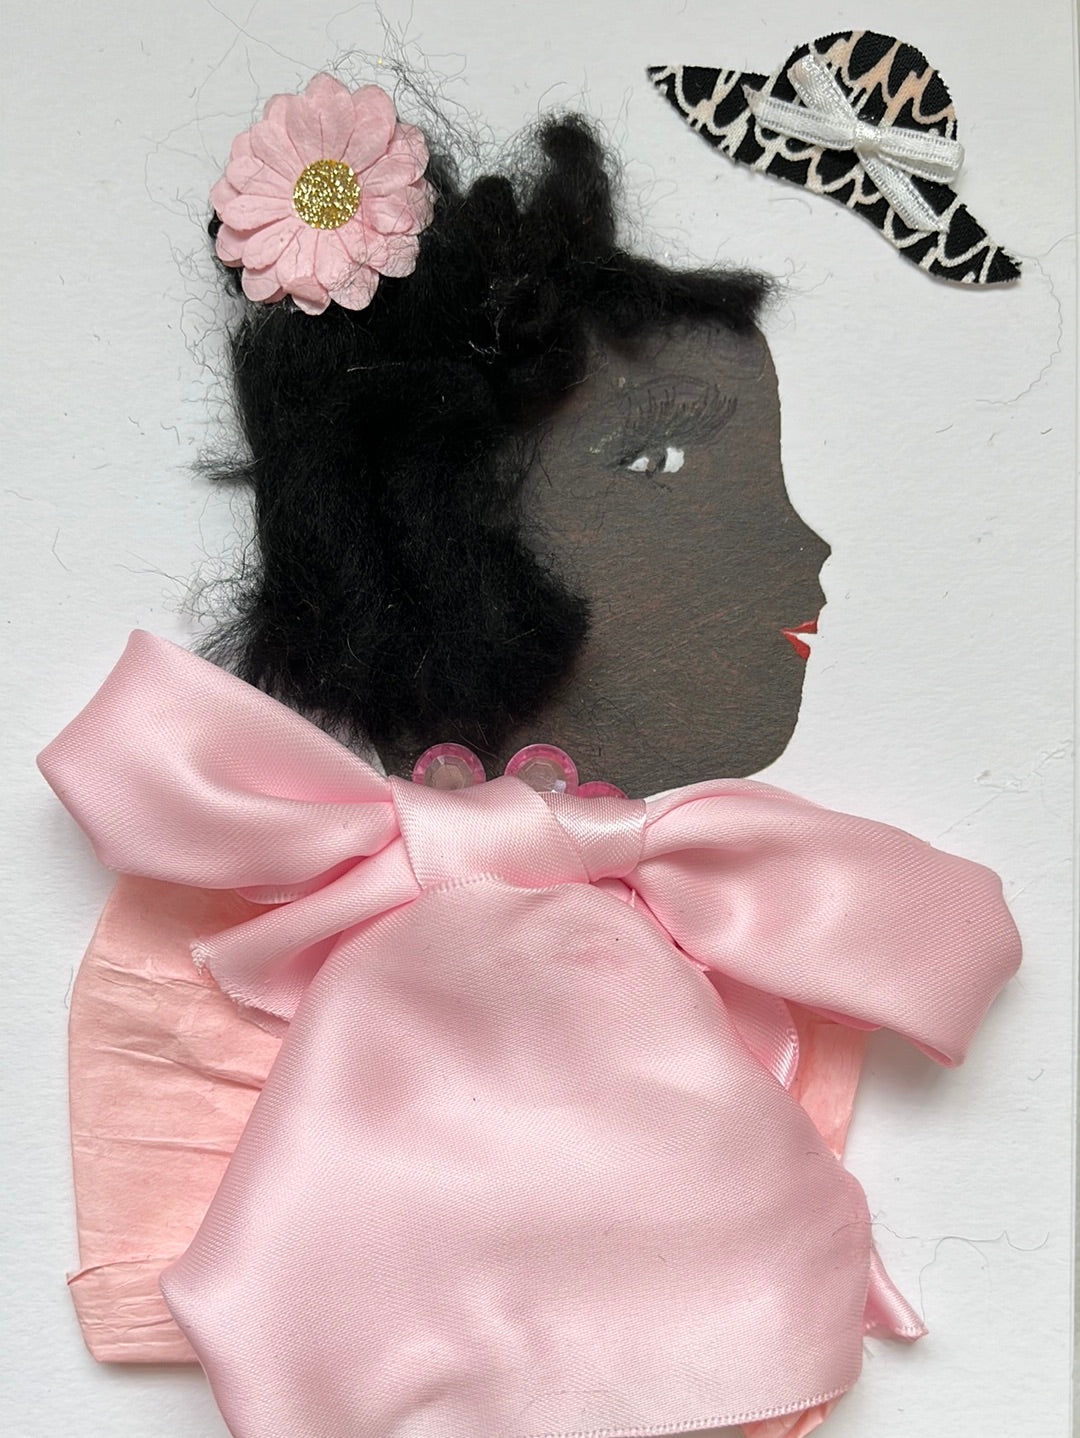 This card is of a woman given the name Hattie. Hattie wears a baby pink blouse that is made of a paper material, and there is a large silky pink bow on the neck. She wears a pink gem necklace, and a pink flower with a gold shimmery center in her short black hair. On the top right corner, there is a black and white floppy hat sticker which has a small white bow on it. A beautiful card  to frame for your home or the perfect gift for someone to celebrate 